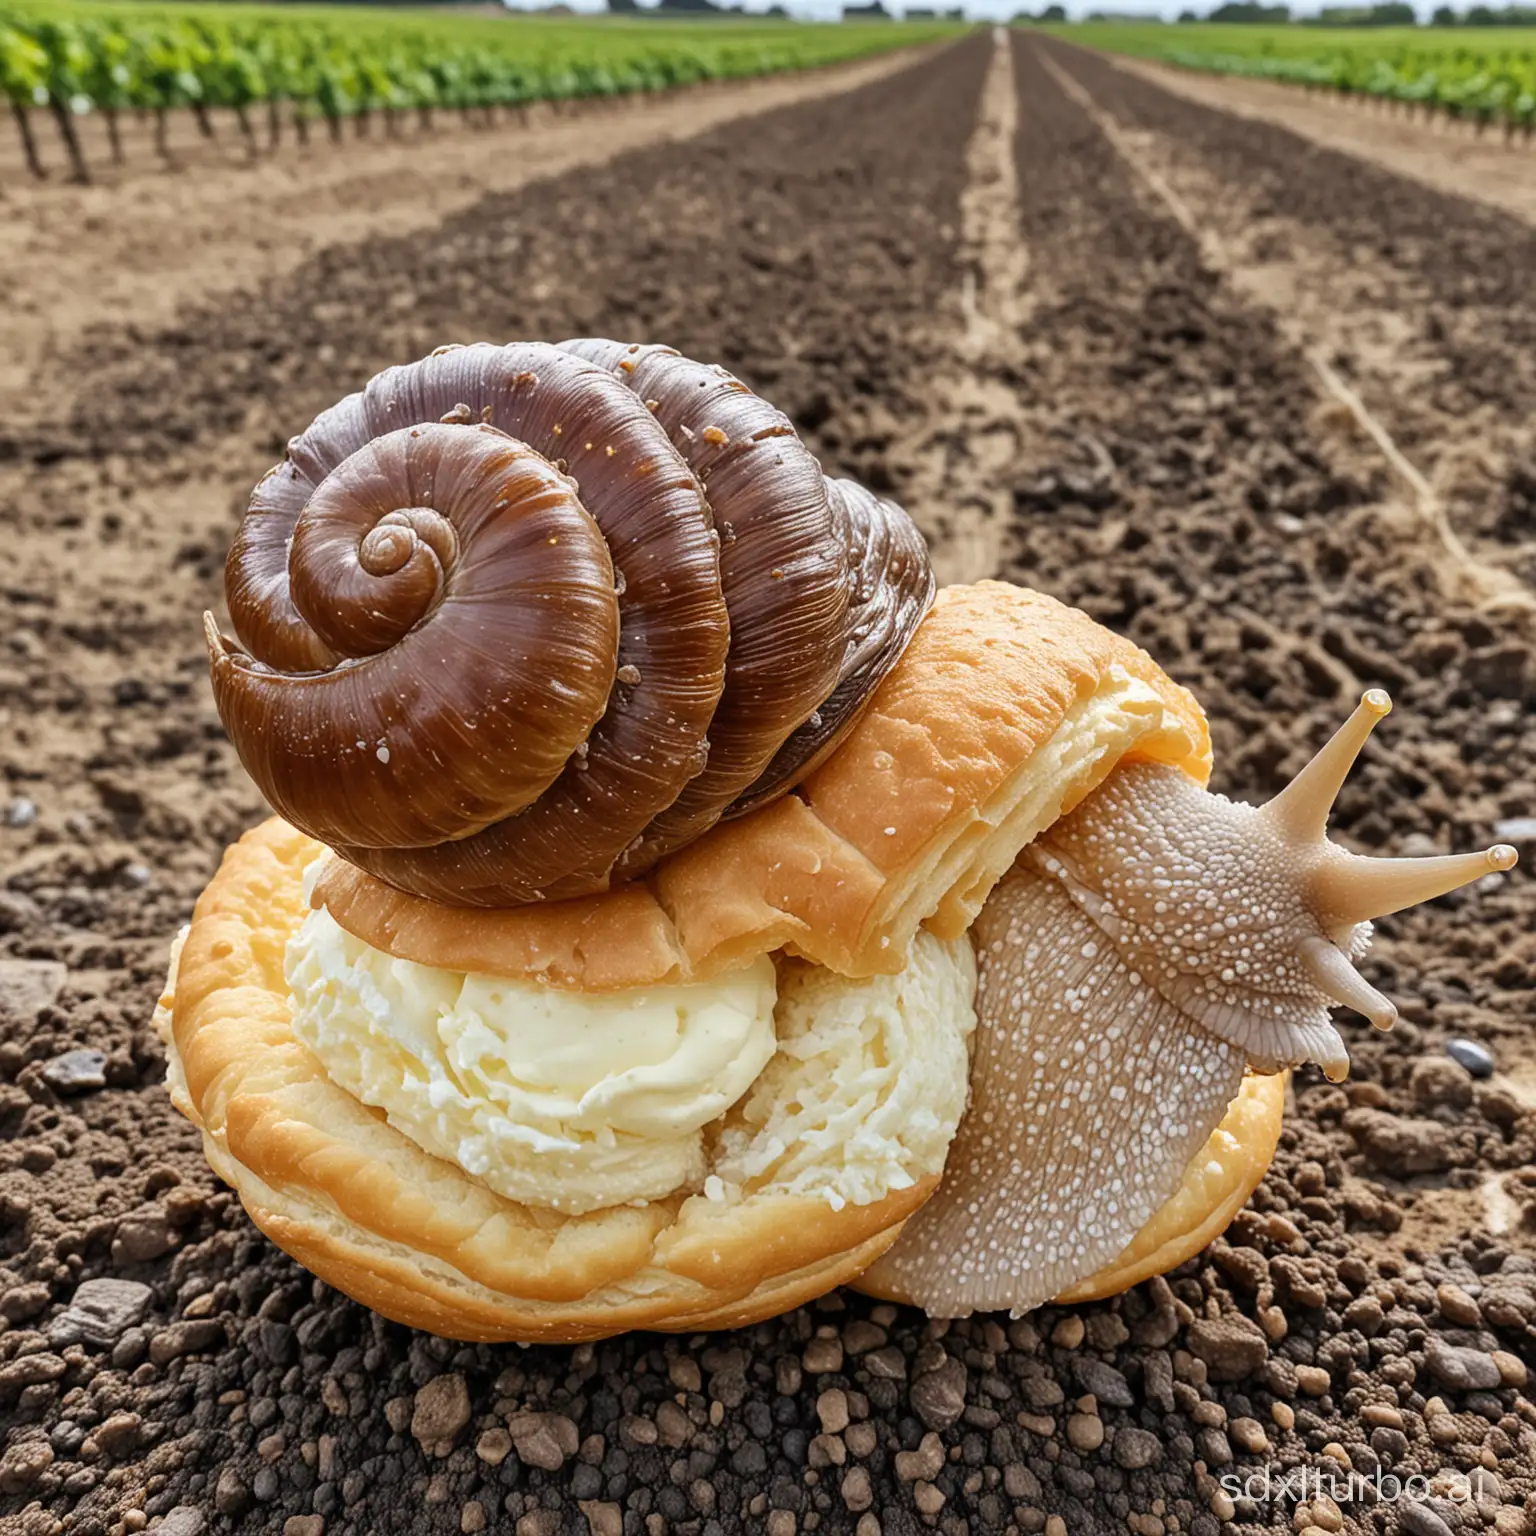 Giant-Vineyard-Snail-with-Cream-Puff-Shell